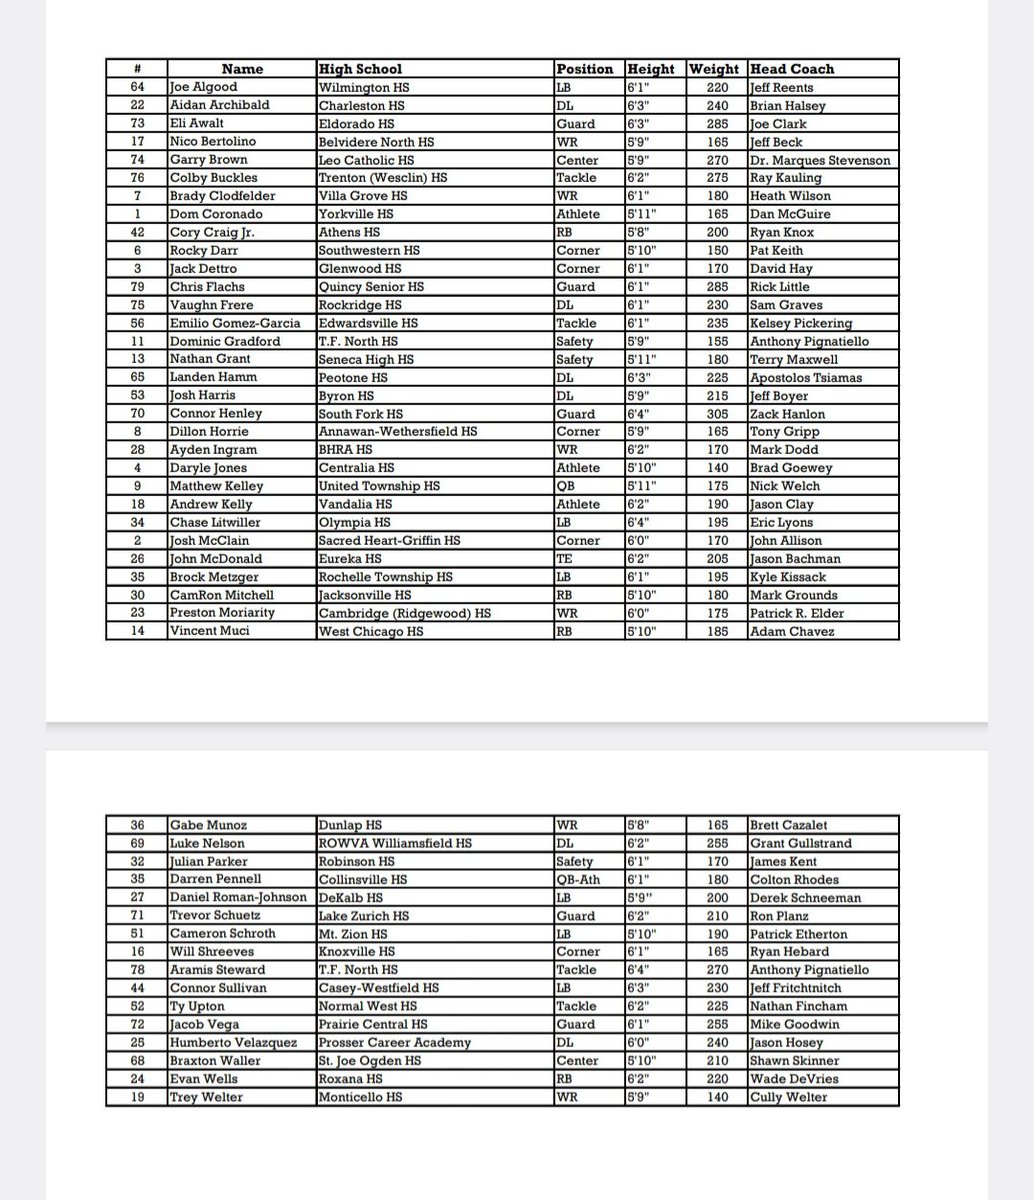 The 50th annual IL Shrine Game is set for Saturday, June 15th with kickoff at 11:00 am at Tucci Stadium on the campus of Illinois Wesleyan University. Below are the list of players for the Red Team and Blue Team, respectively.